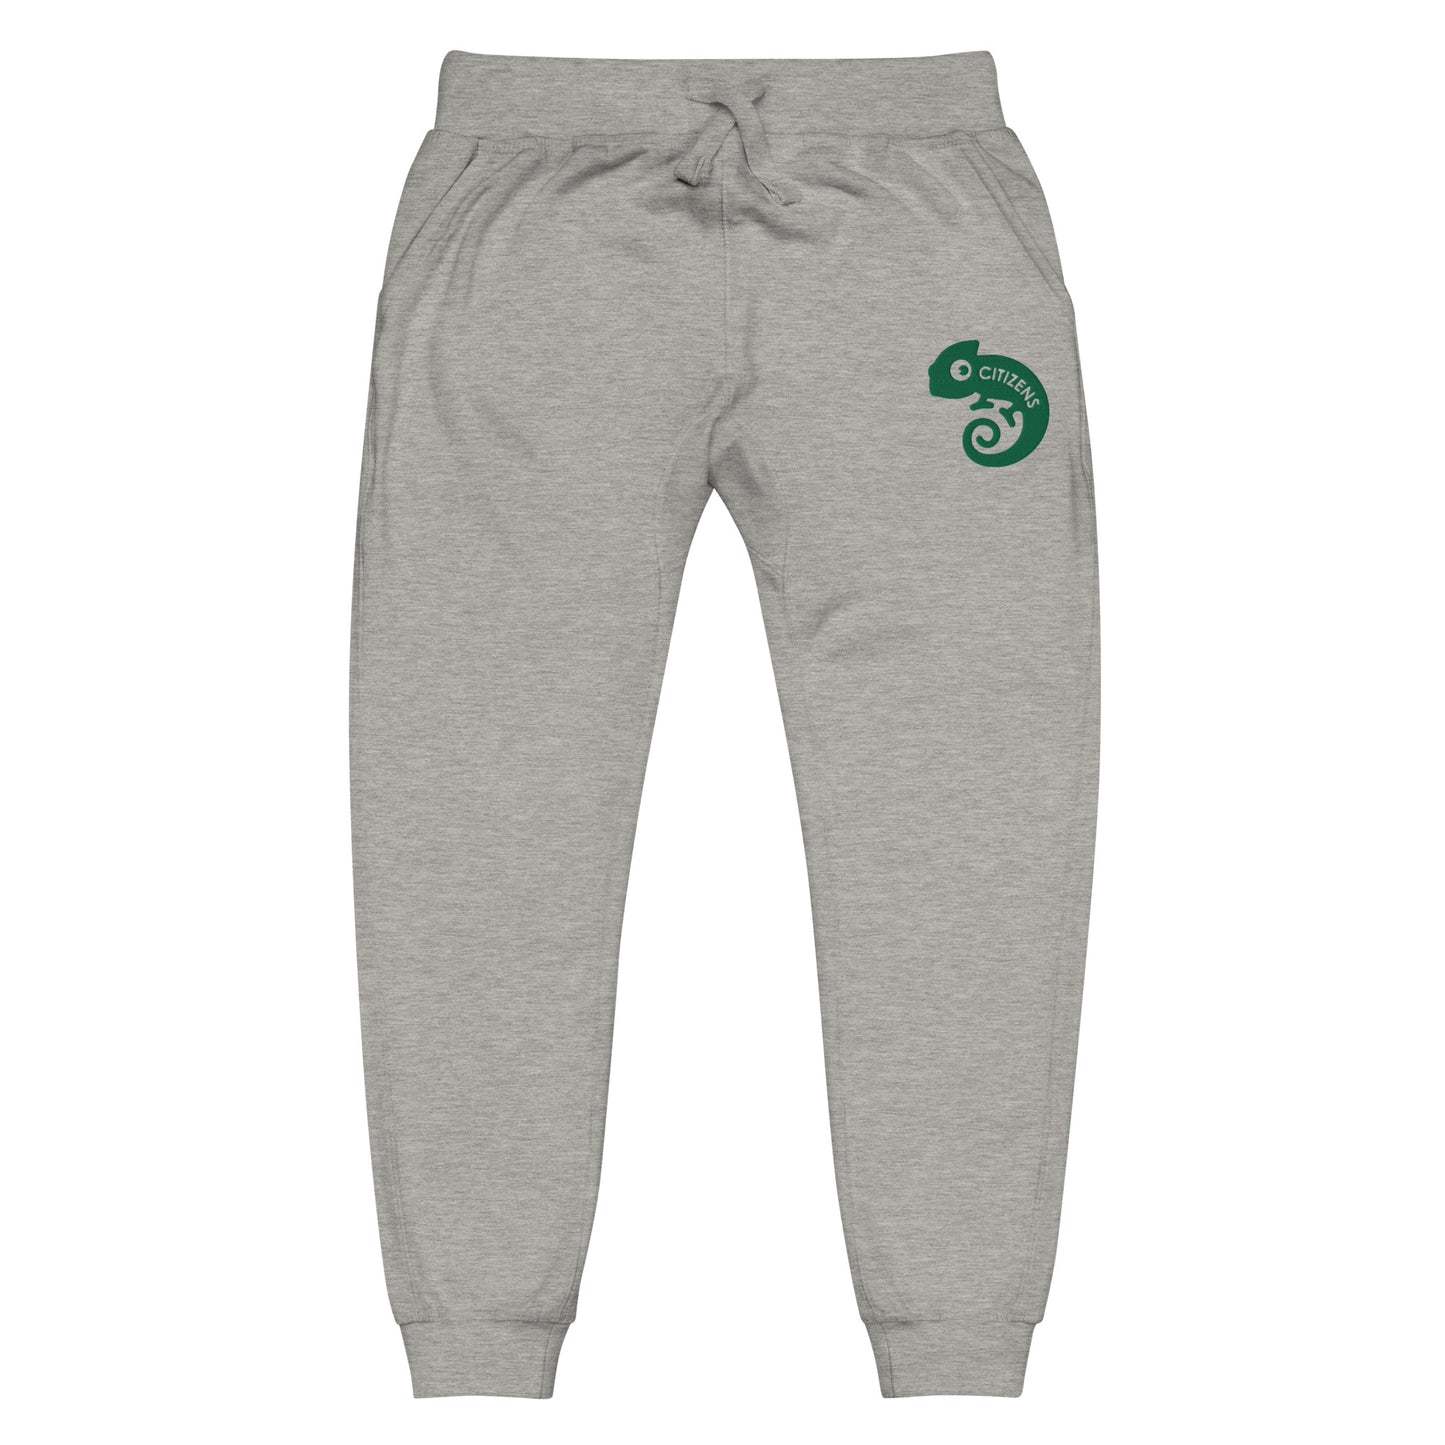 Citizens of the World  sweatpants